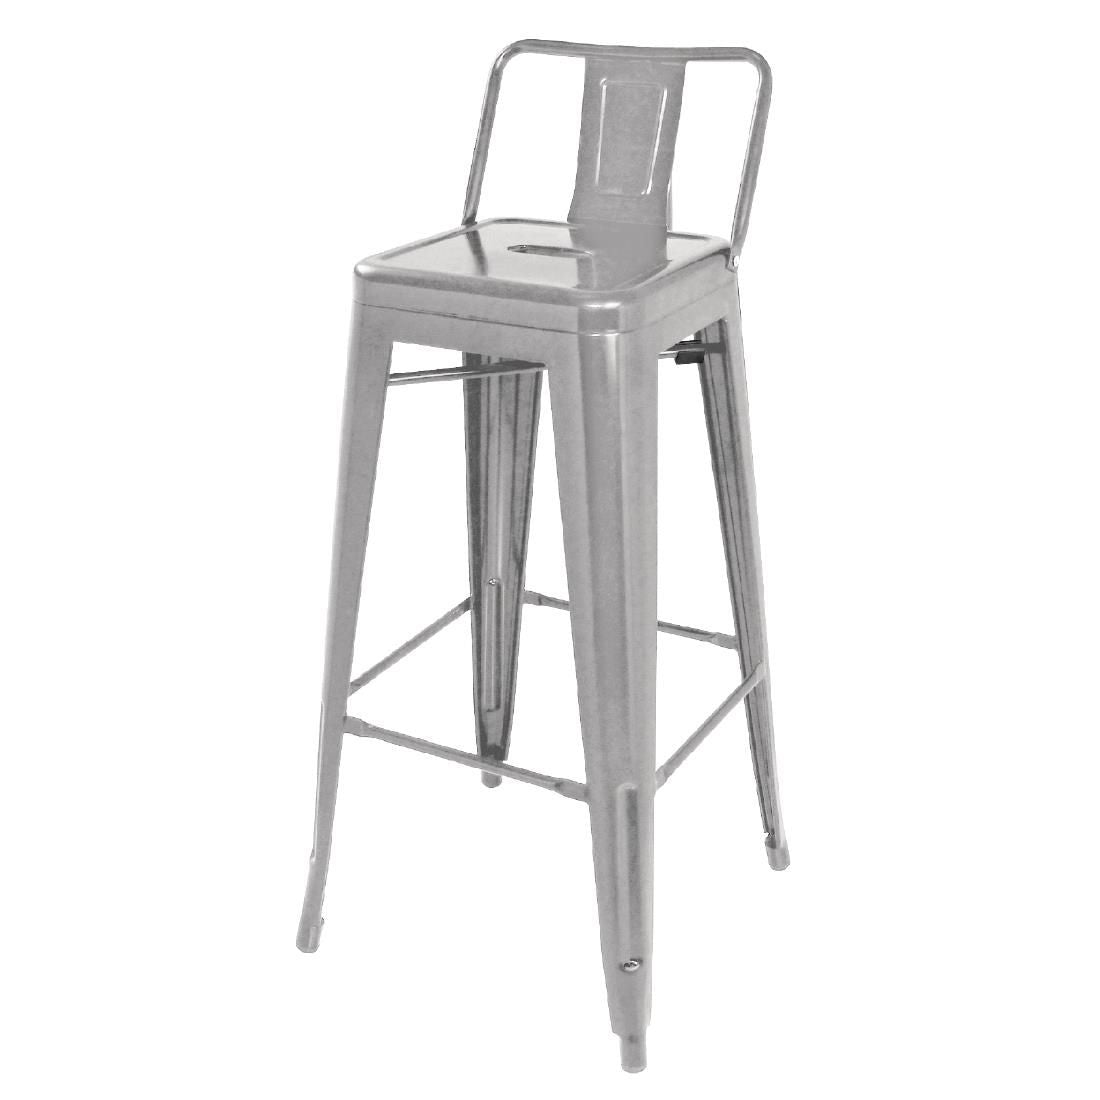 Bolero Bistro Galvanised Steel High Stool with Backrest (Pack of 4) JD Catering Equipment Solutions Ltd